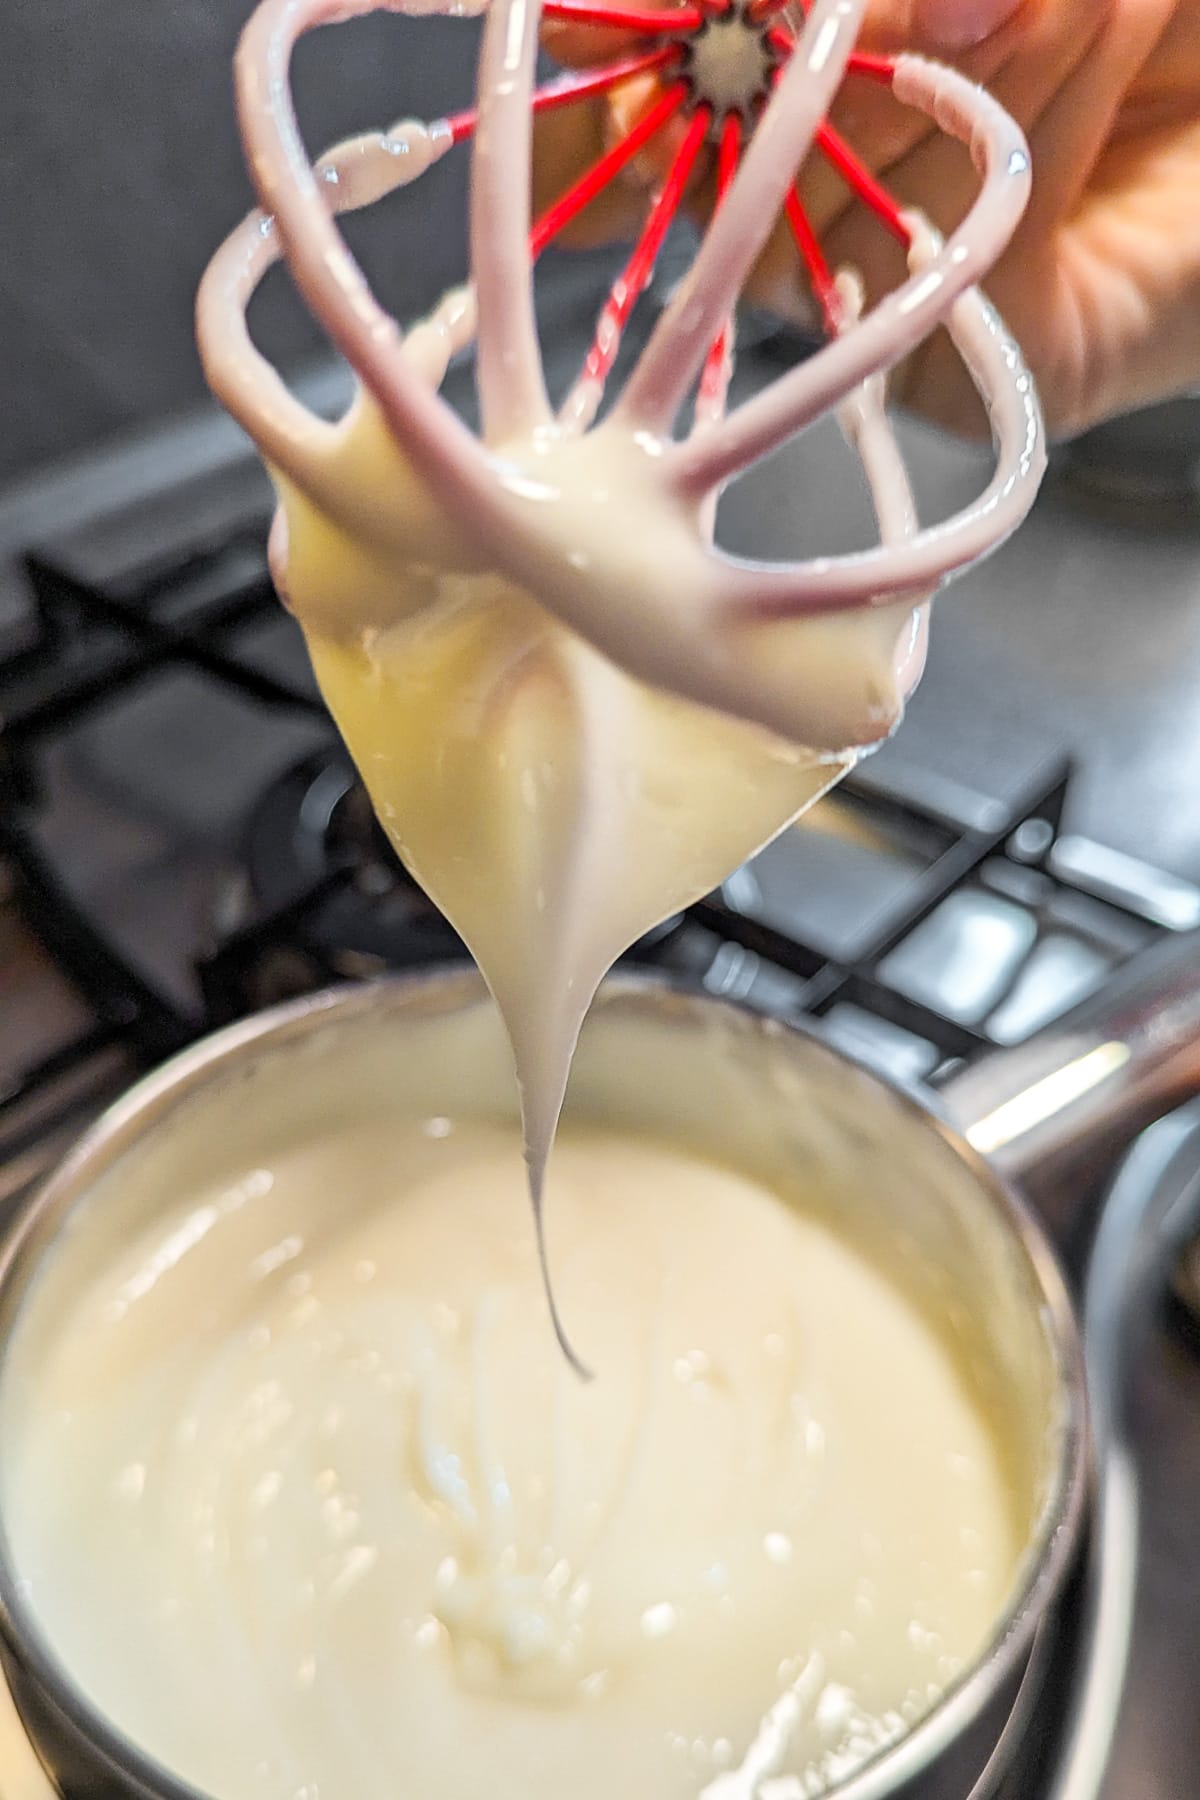 Vanila cream pouring from a red whisk over a pan with vanila cream.